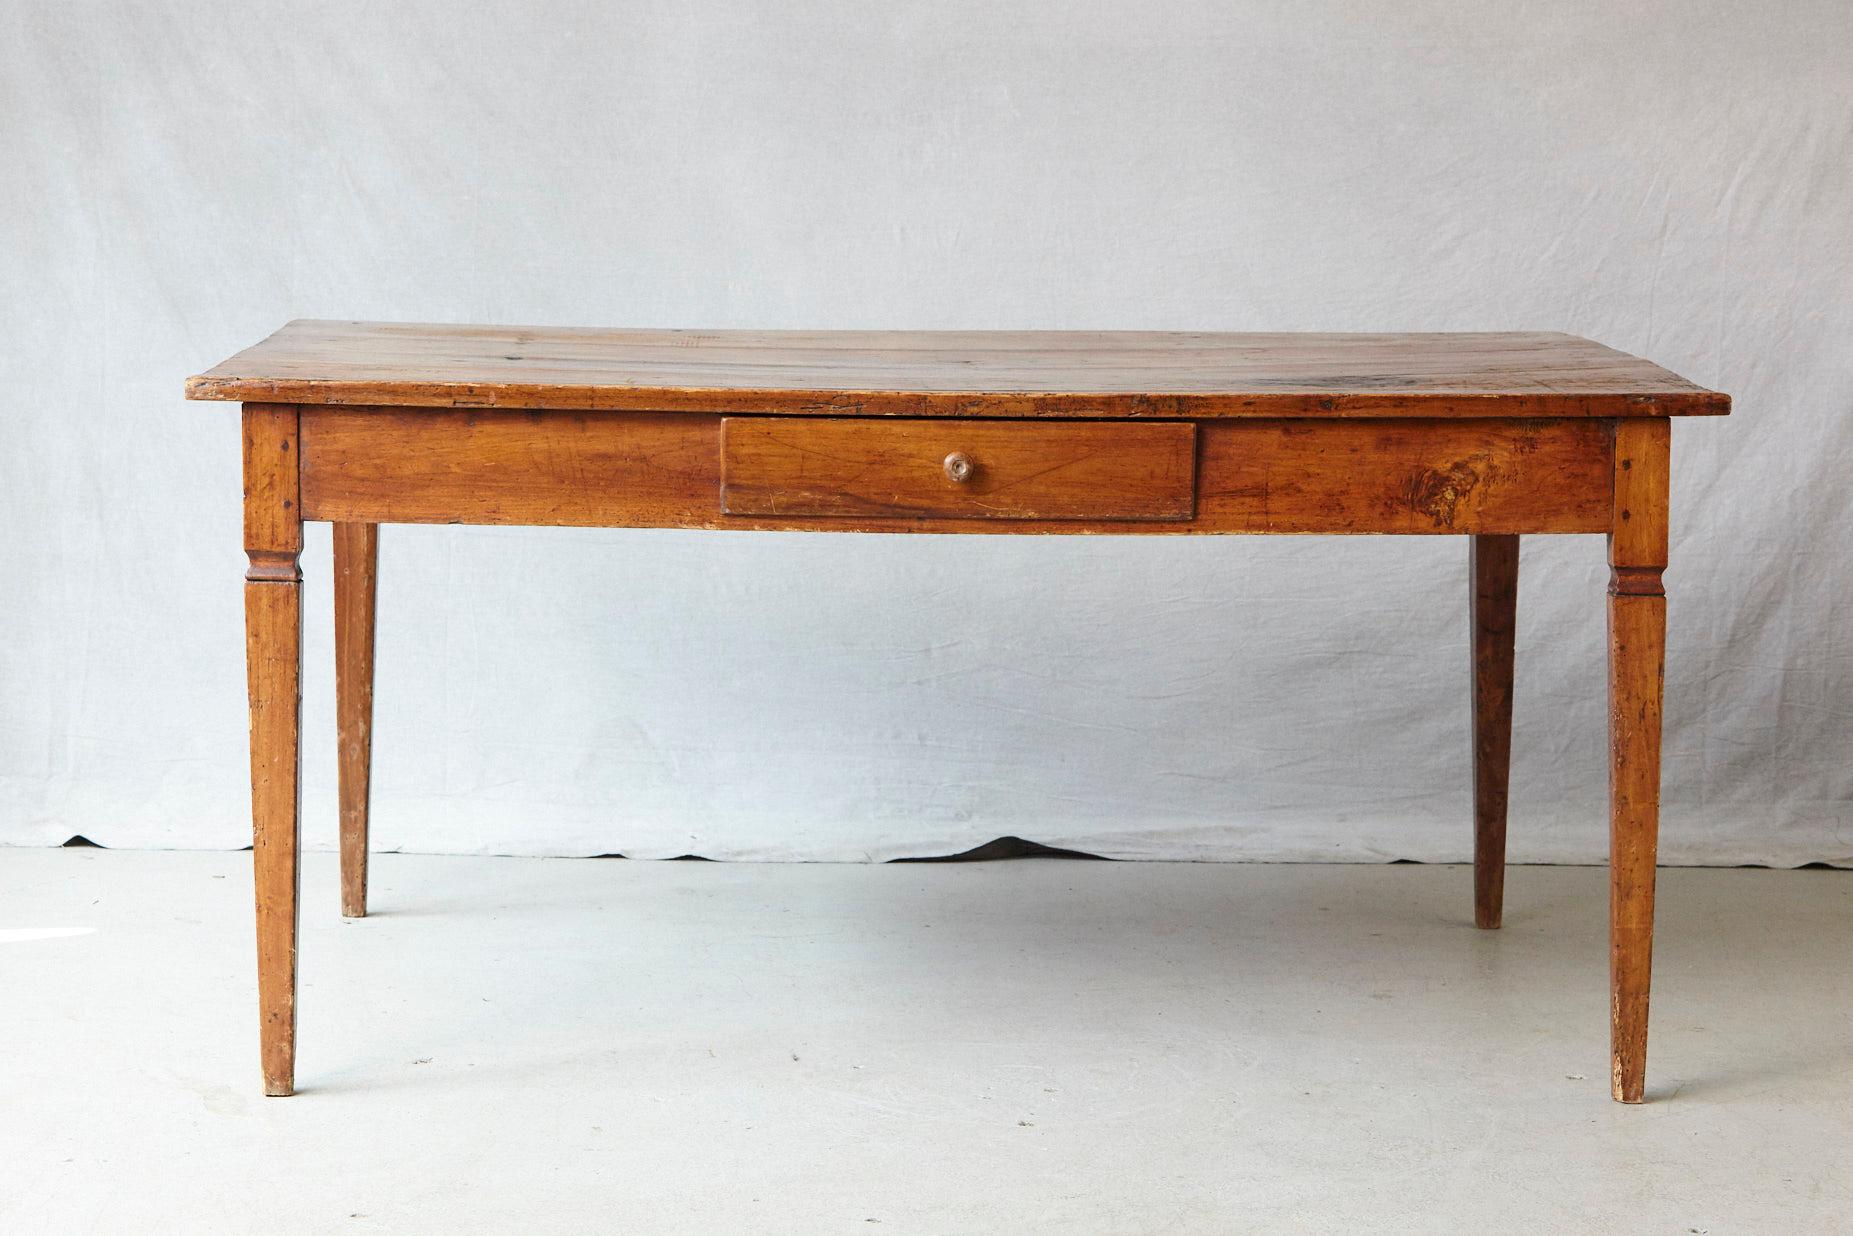 Rustic 19th century Italian country style pine farm table with one drawer and mounted on square tapered legs.
The table has a great patina and you definitely can say he had a life, which reflects on the pine top,
marks, scratches, burn mark